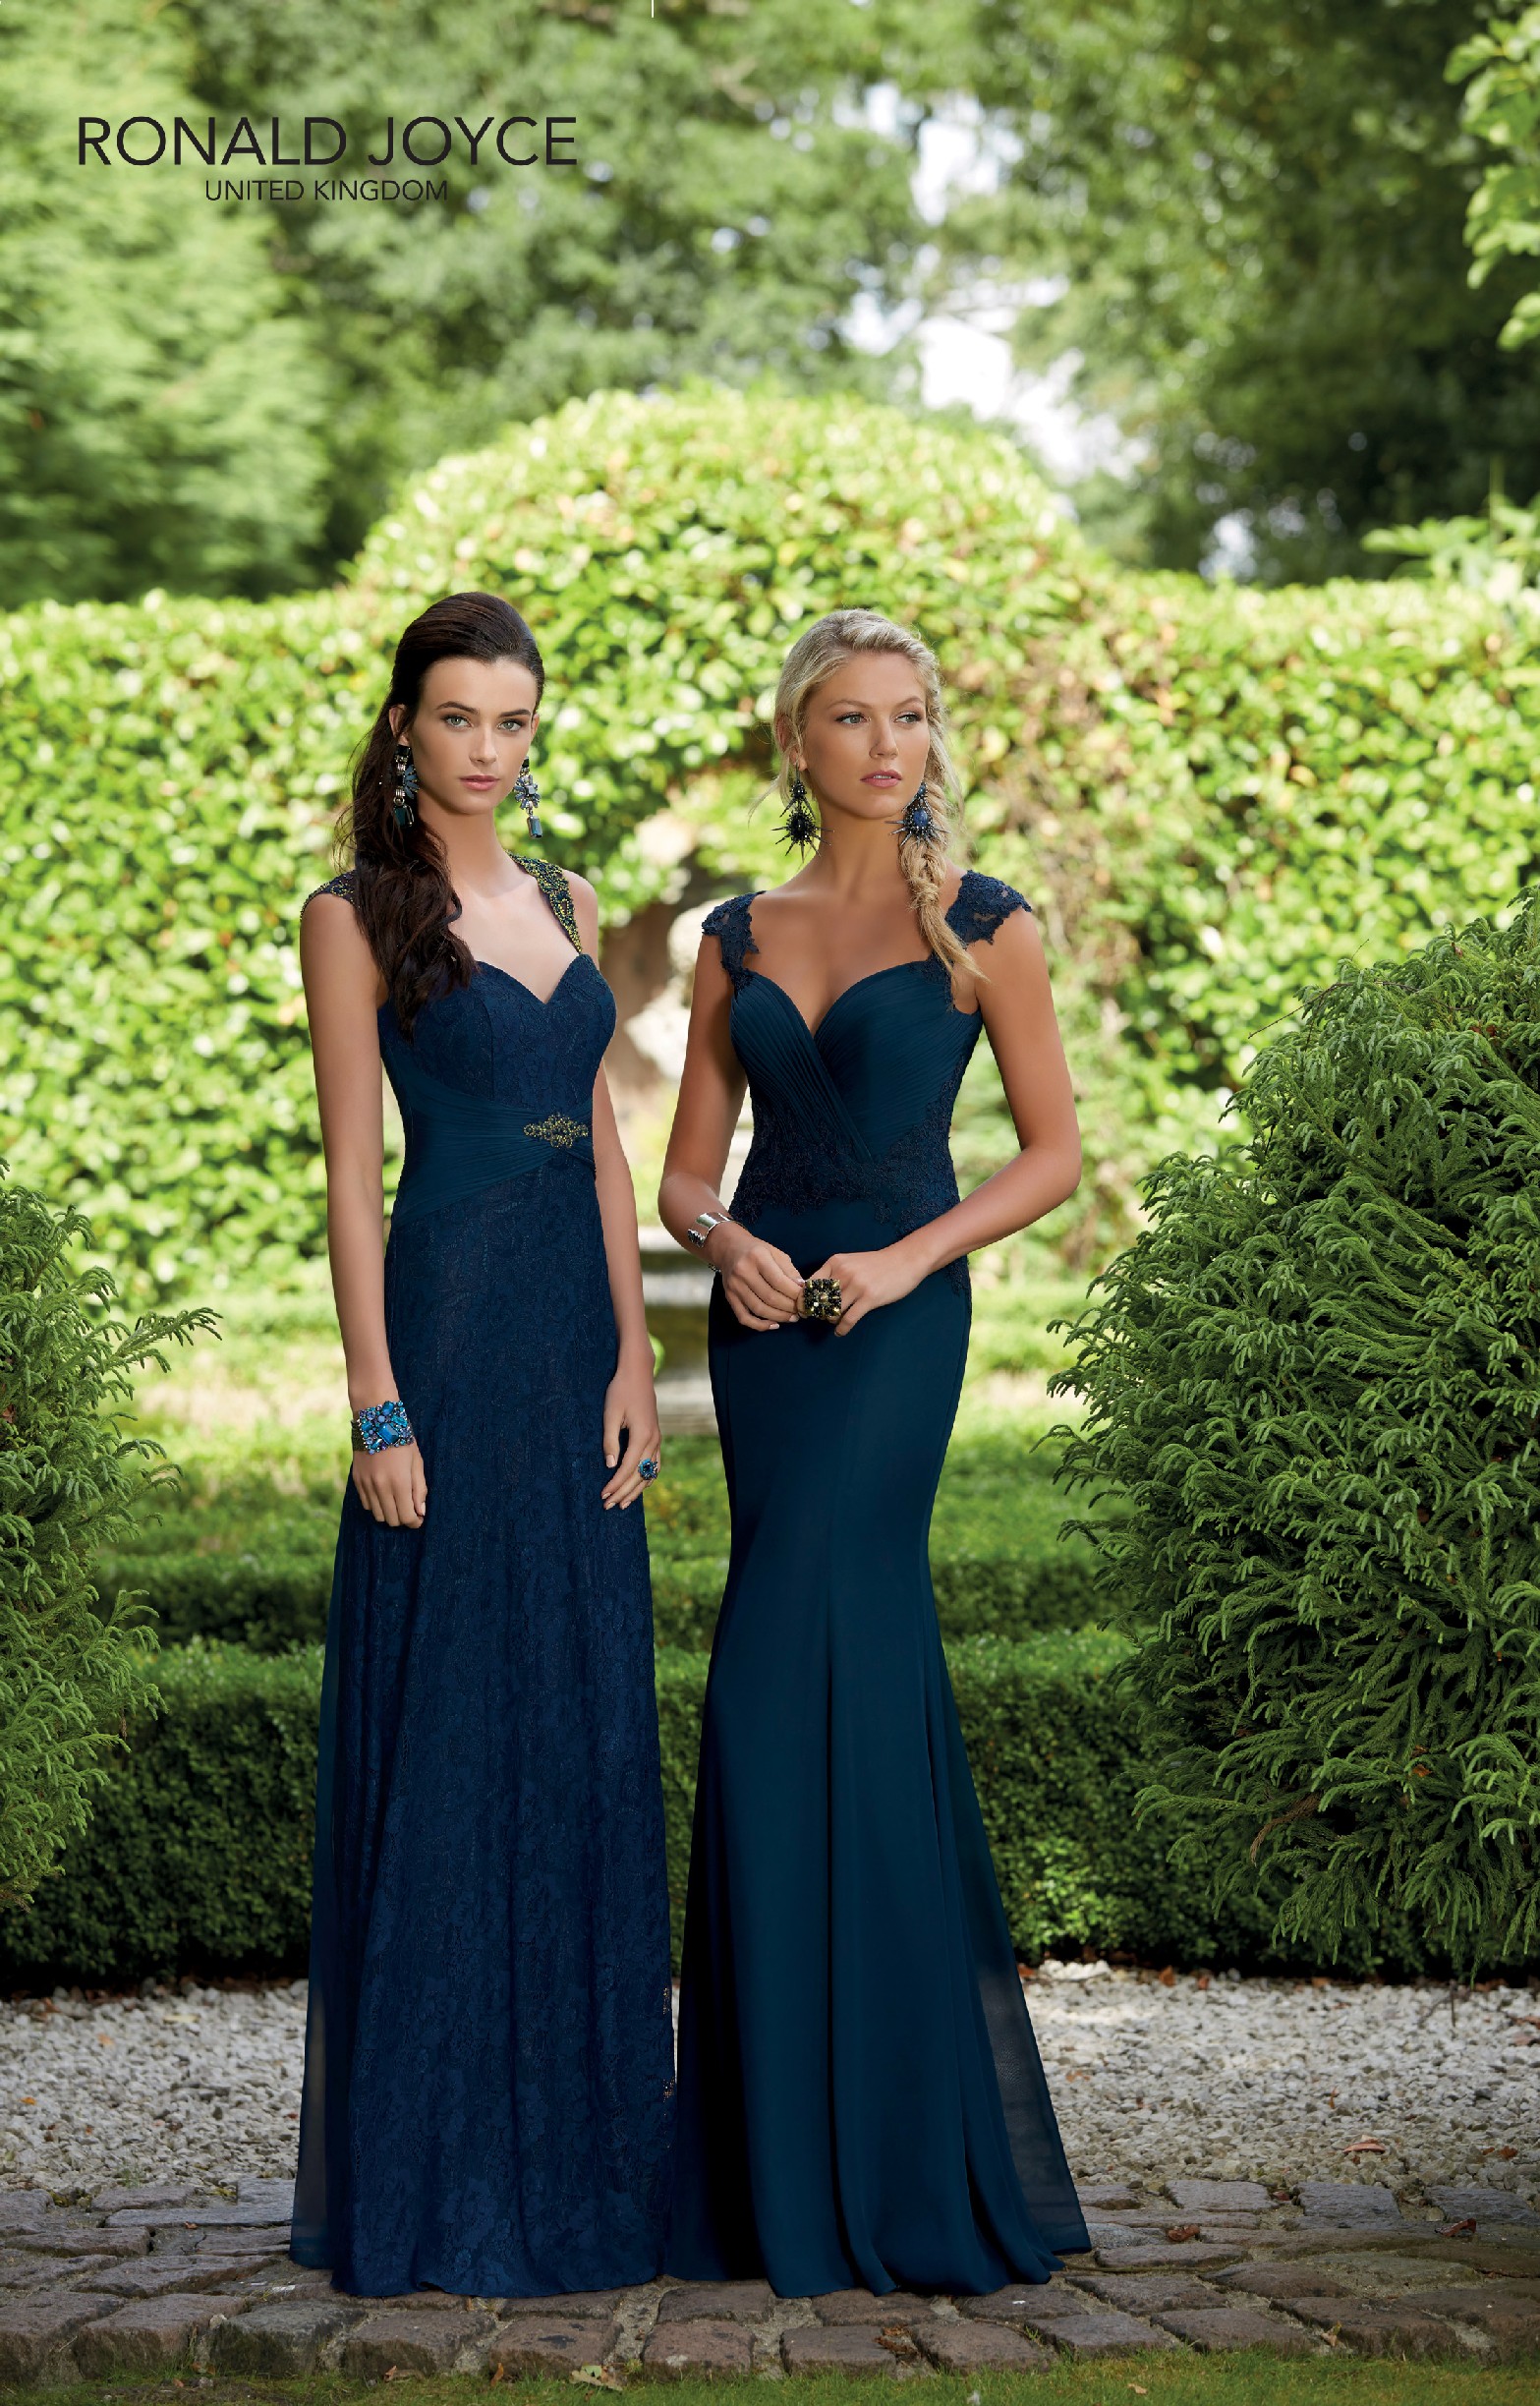 Two teenage bridesmaids stood in a posh garden. One has long dark brown hair and one has long blonde hair. Both wear dark green long bridesmaid dresses with sweetheart necklines